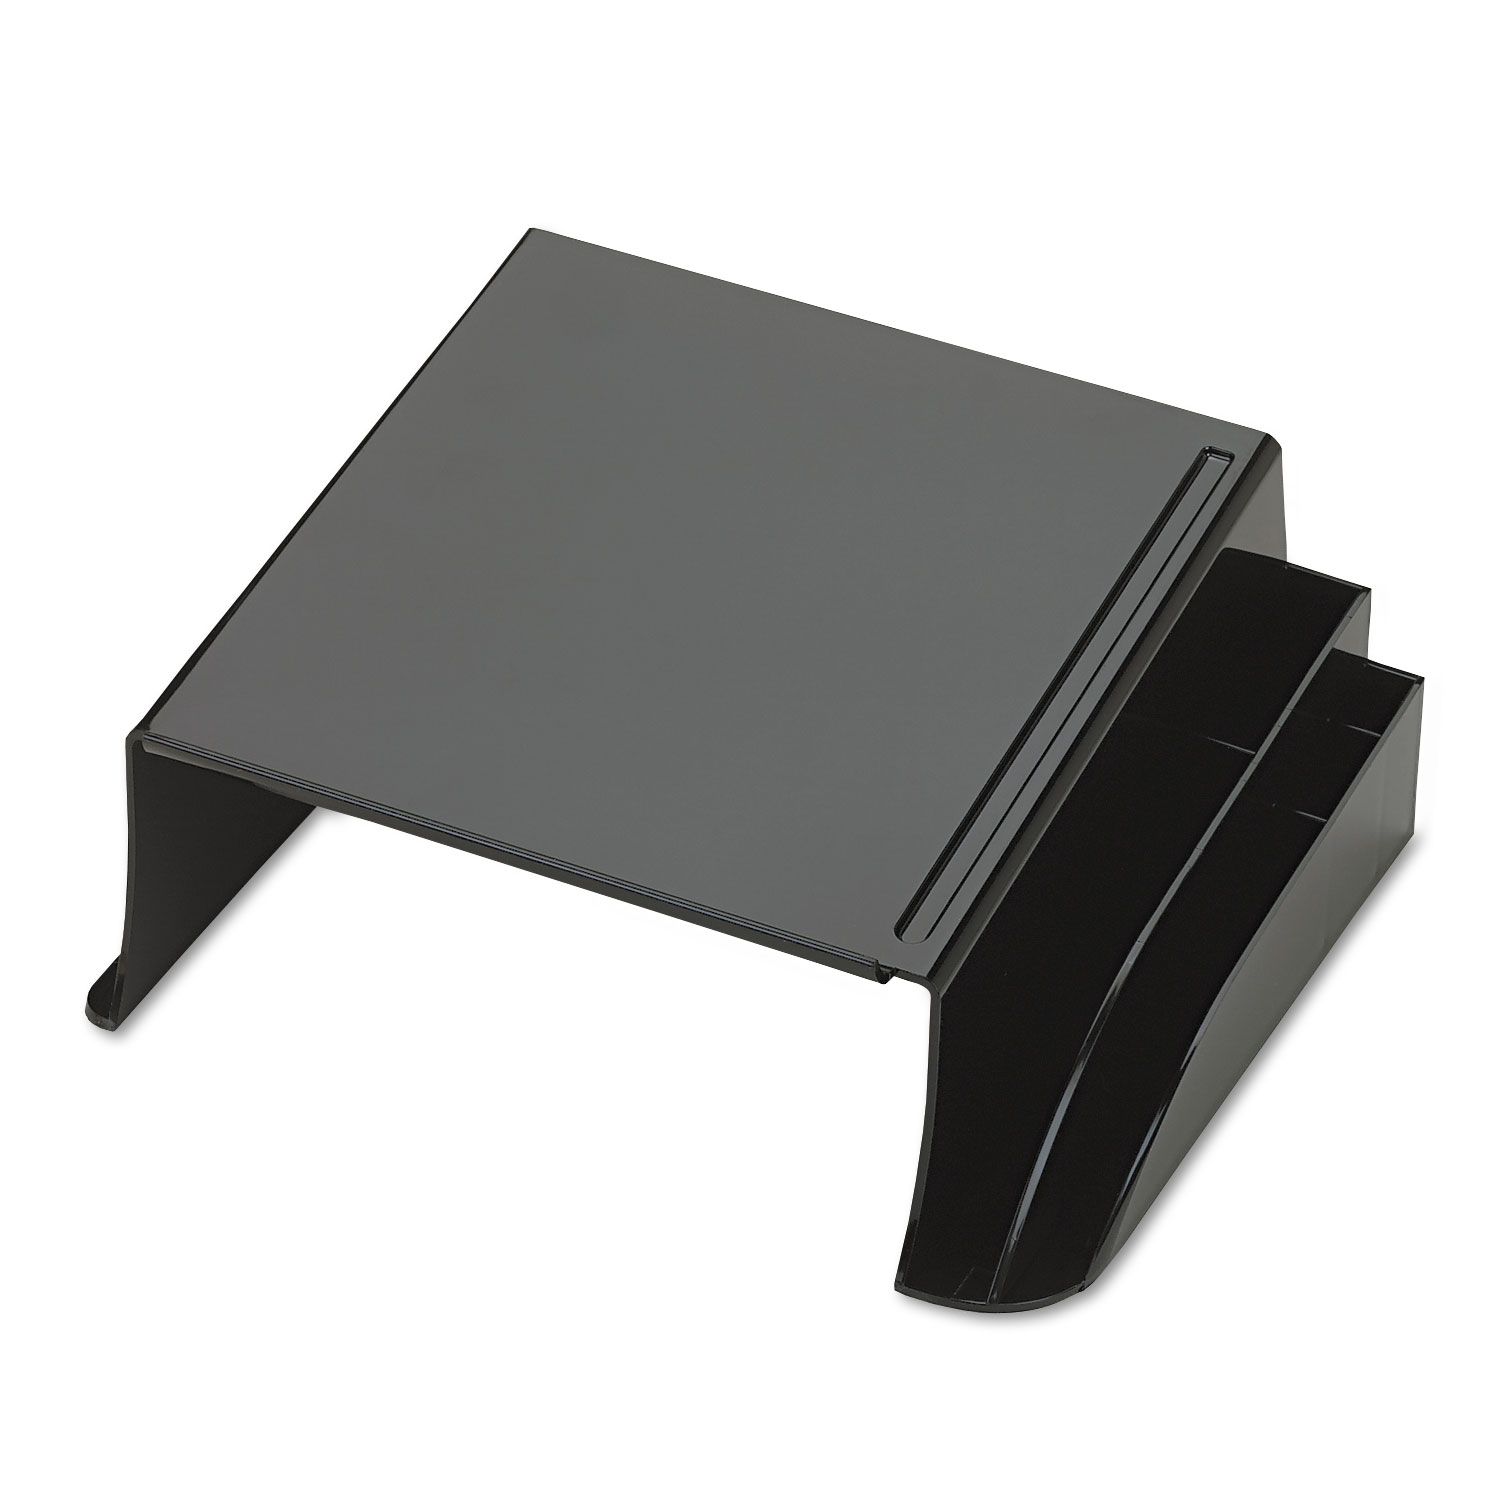 Officemate 2200 Series Telephone Stand, 12 1/4w x 10 1/2d x 5 1/4h, Black